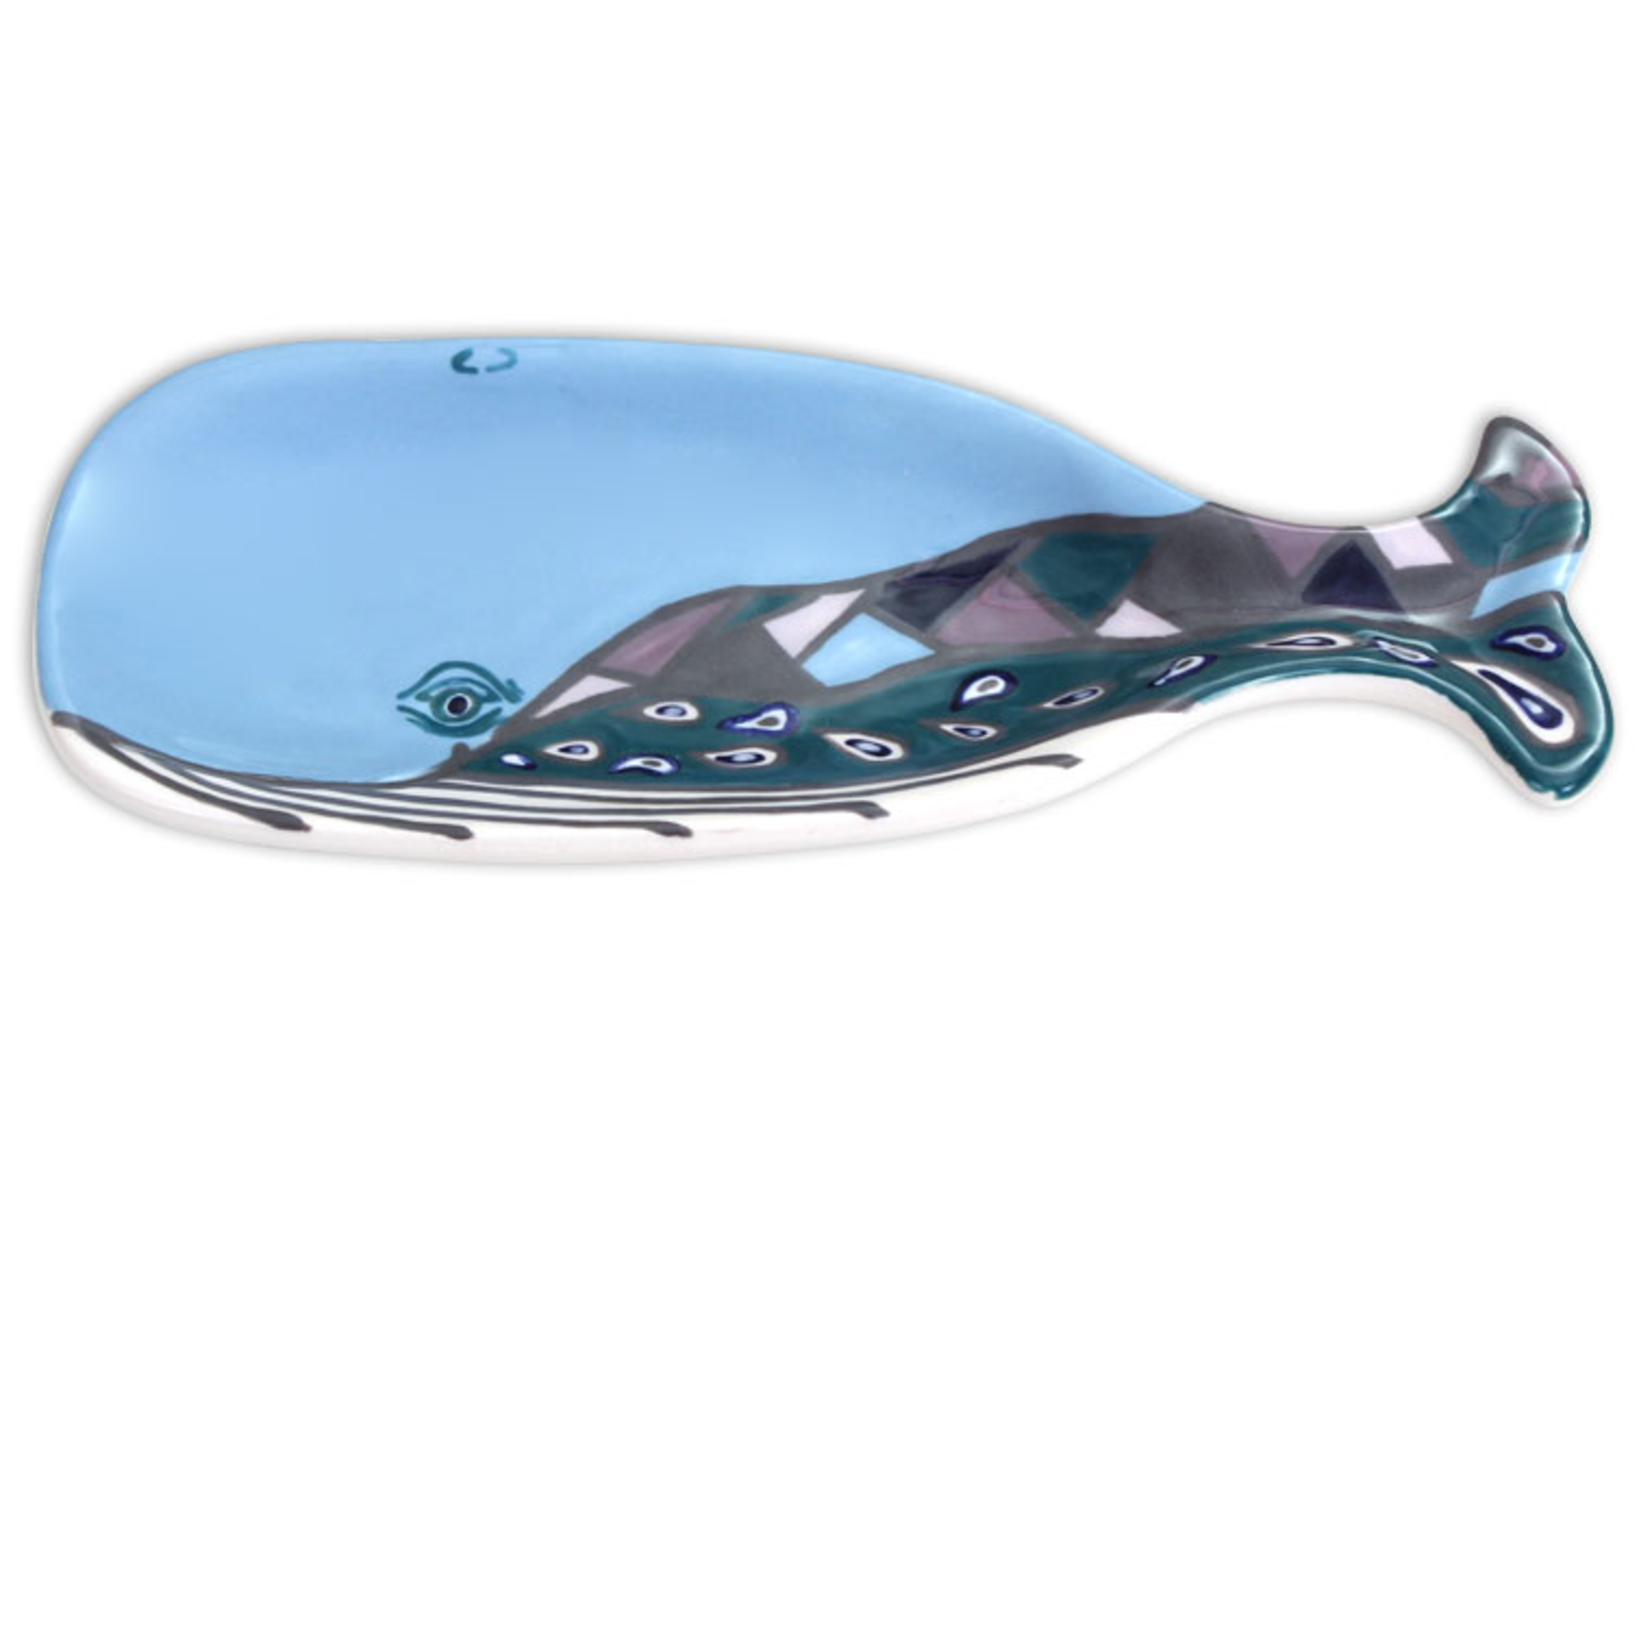 Baby Whale Spoon Rest